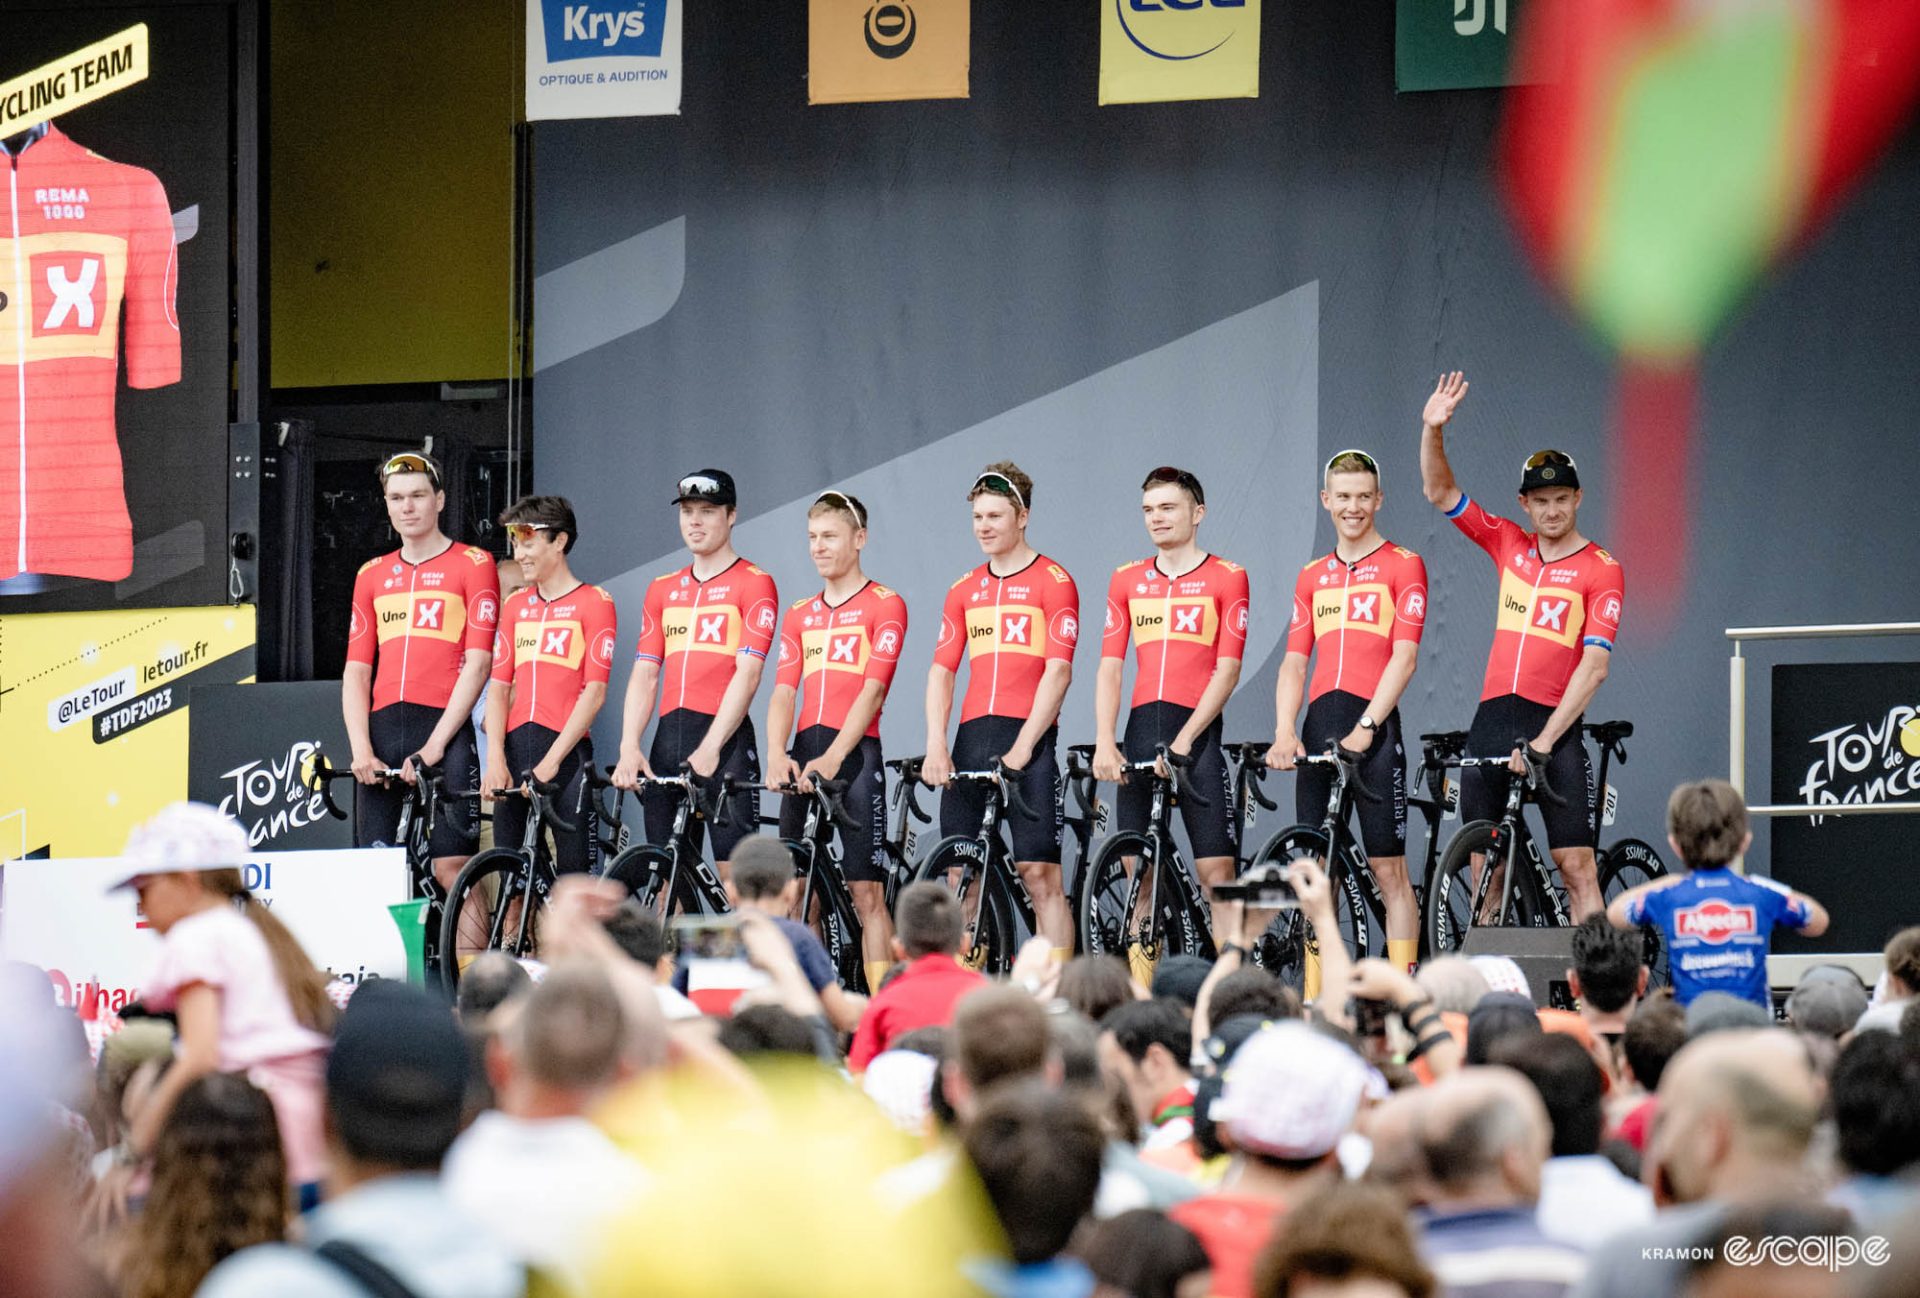 Alexander Kristoff stands on a stage along with his Uno-X teammates at the 2023 TdF team presentation. He waves to the large assembled crowd as his seven teammates stand next to him in their kits and team bikes.